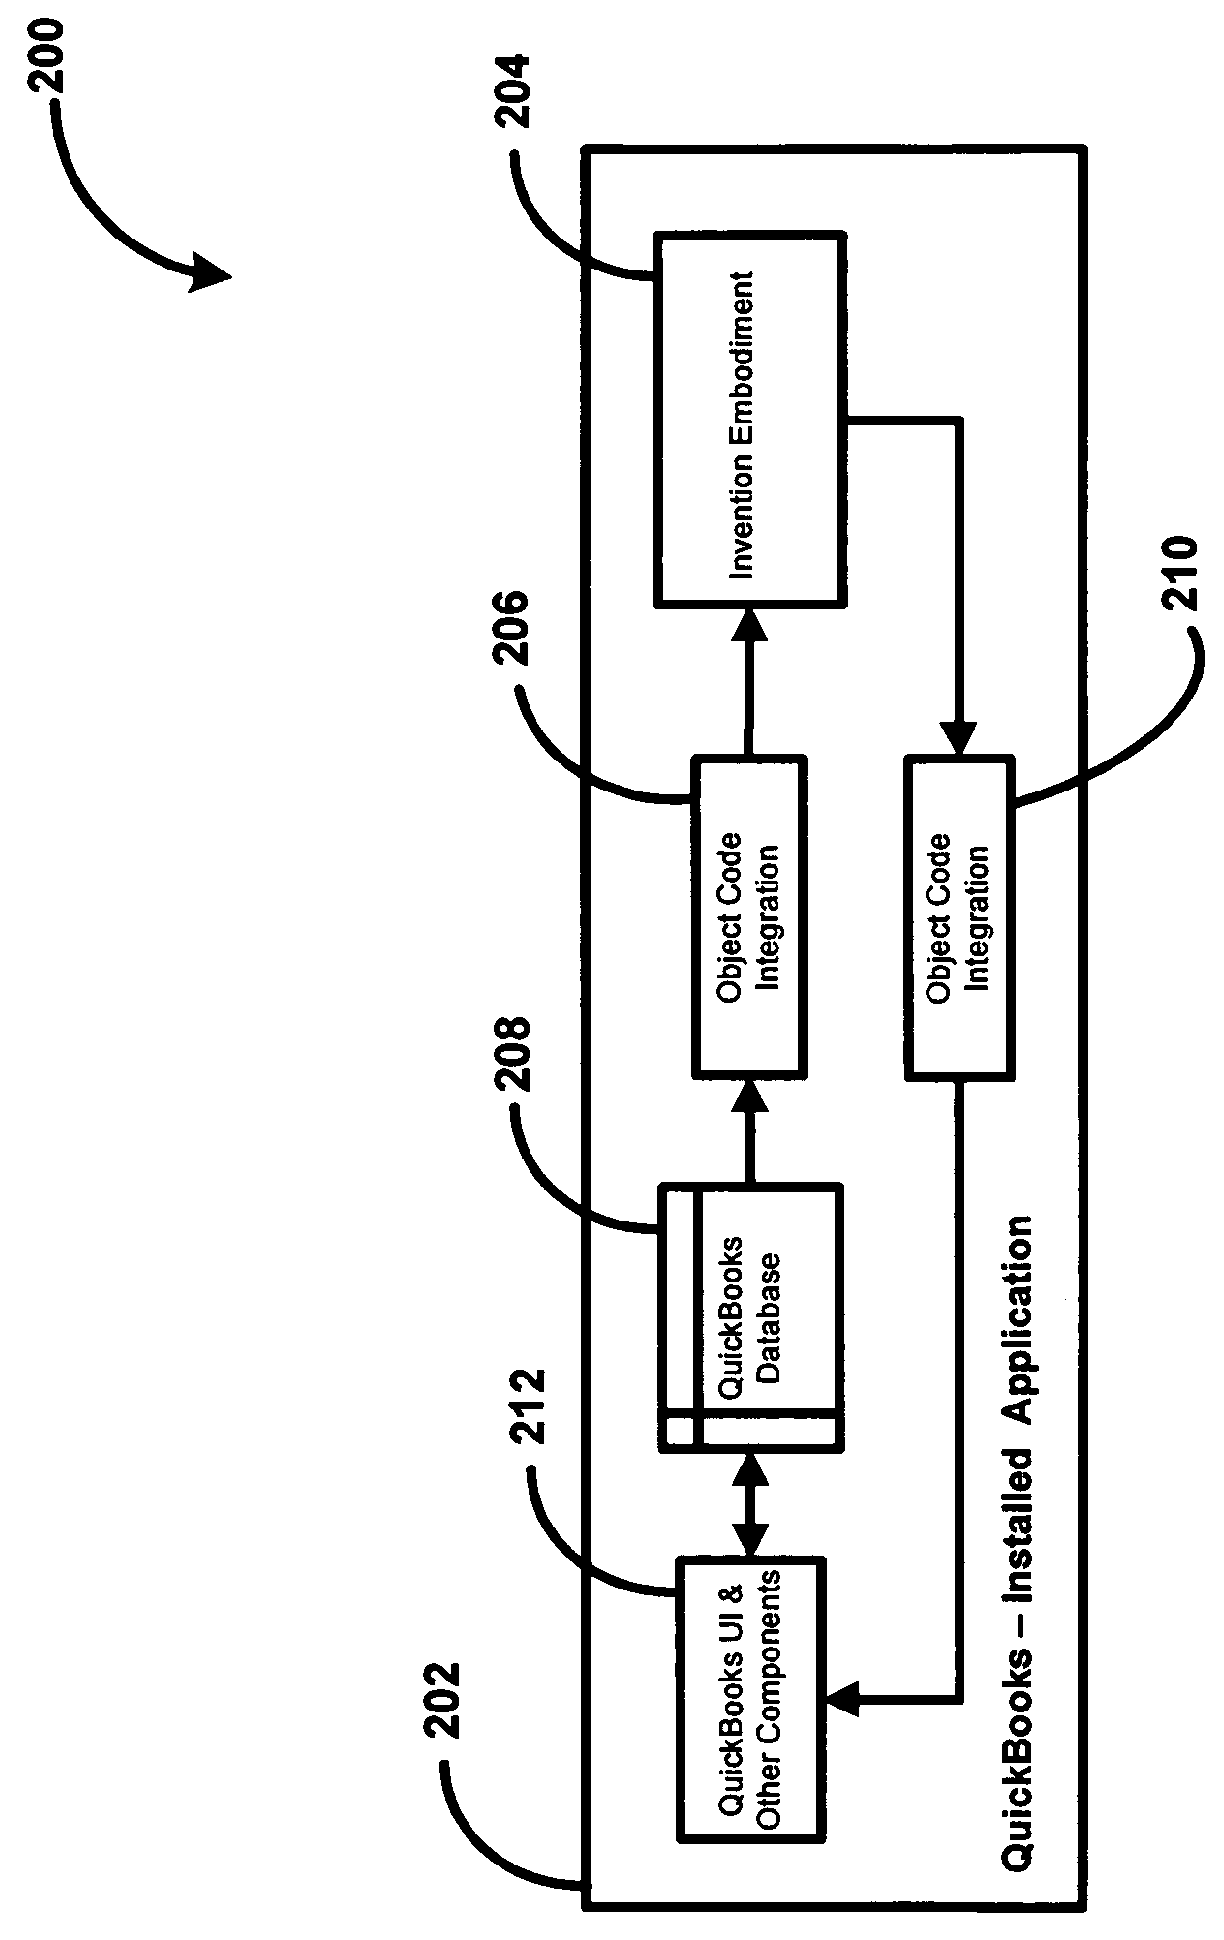 Platform independent plug-in methods and systems for data mining and analytics